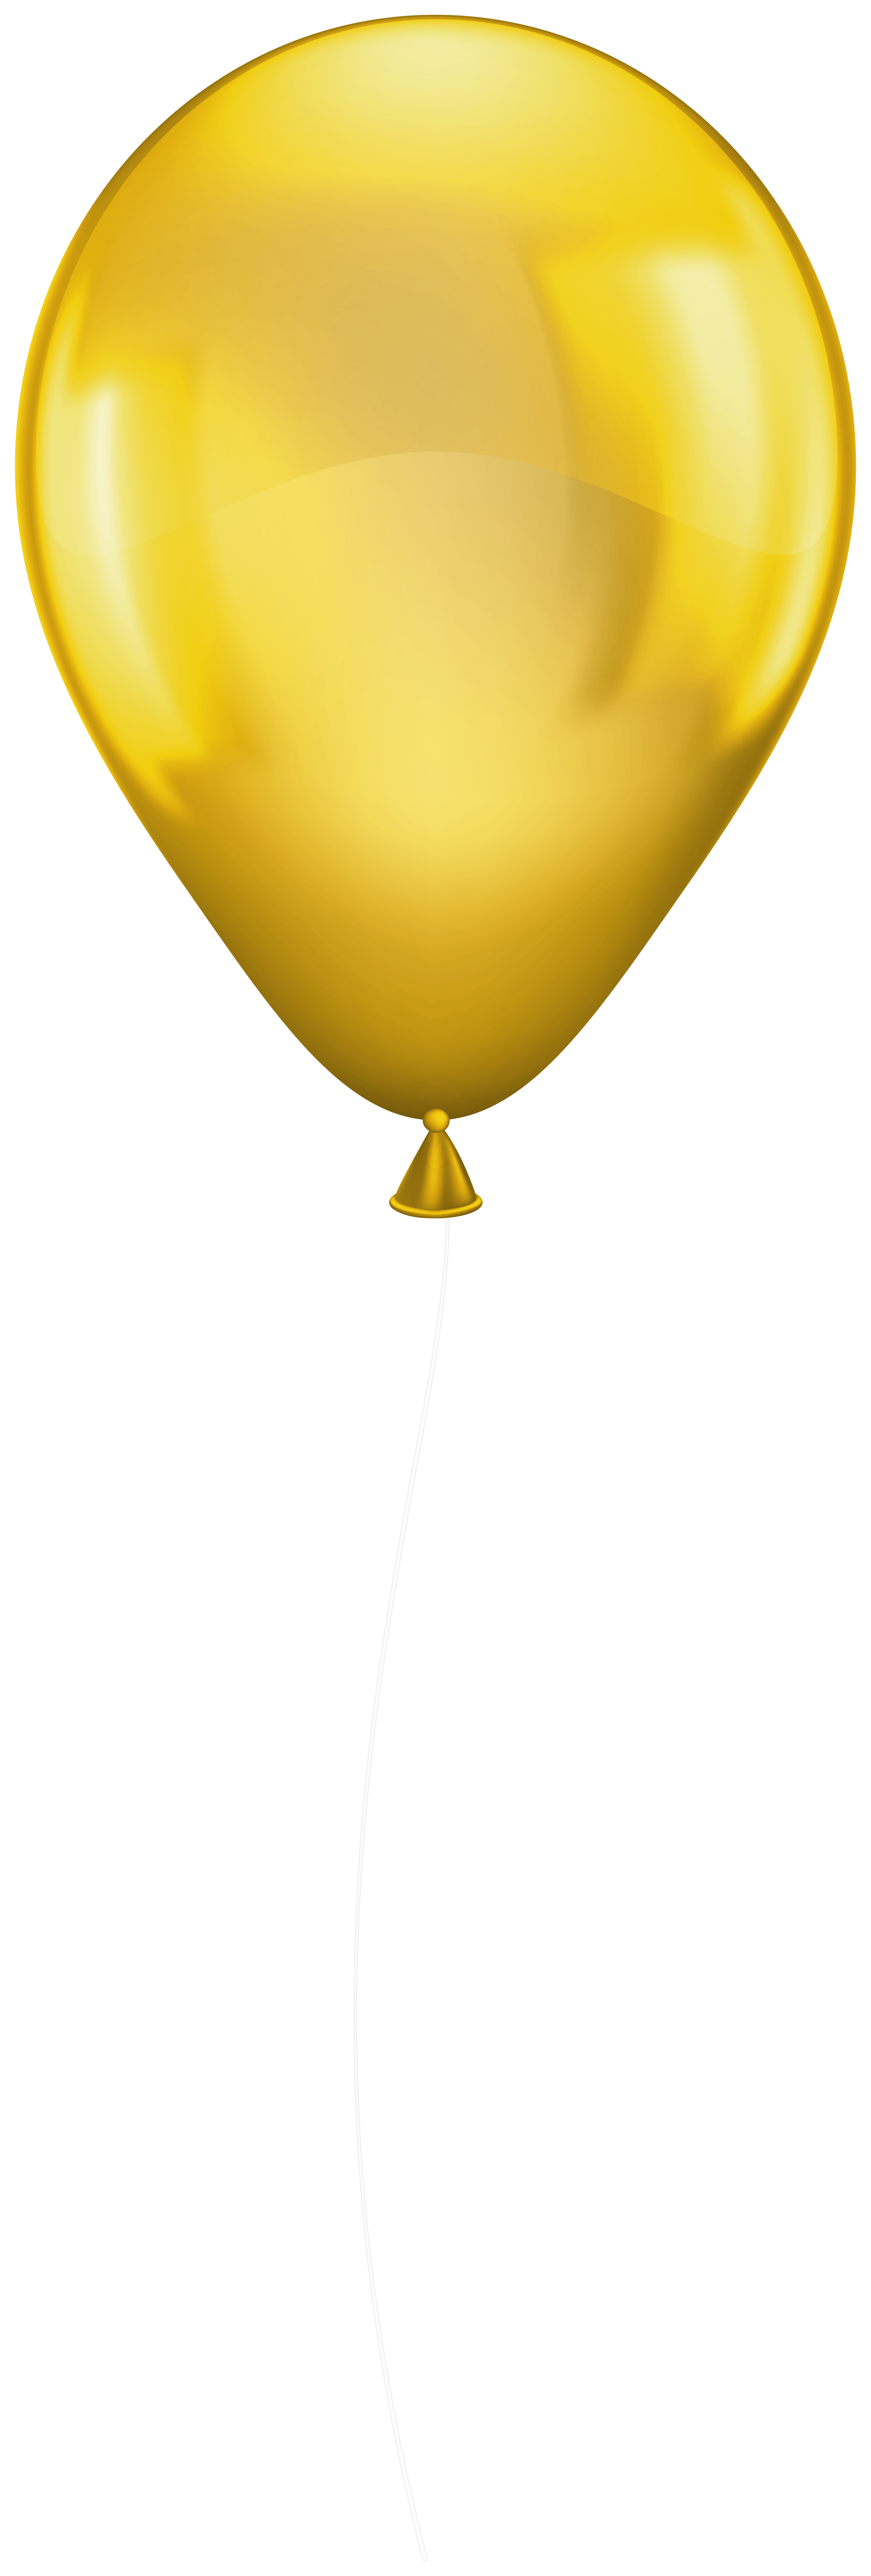 Yellow Balloon Transparent Png Clipart Gallery Yopriceville High Quality Images And Transparent Png Free Clipart